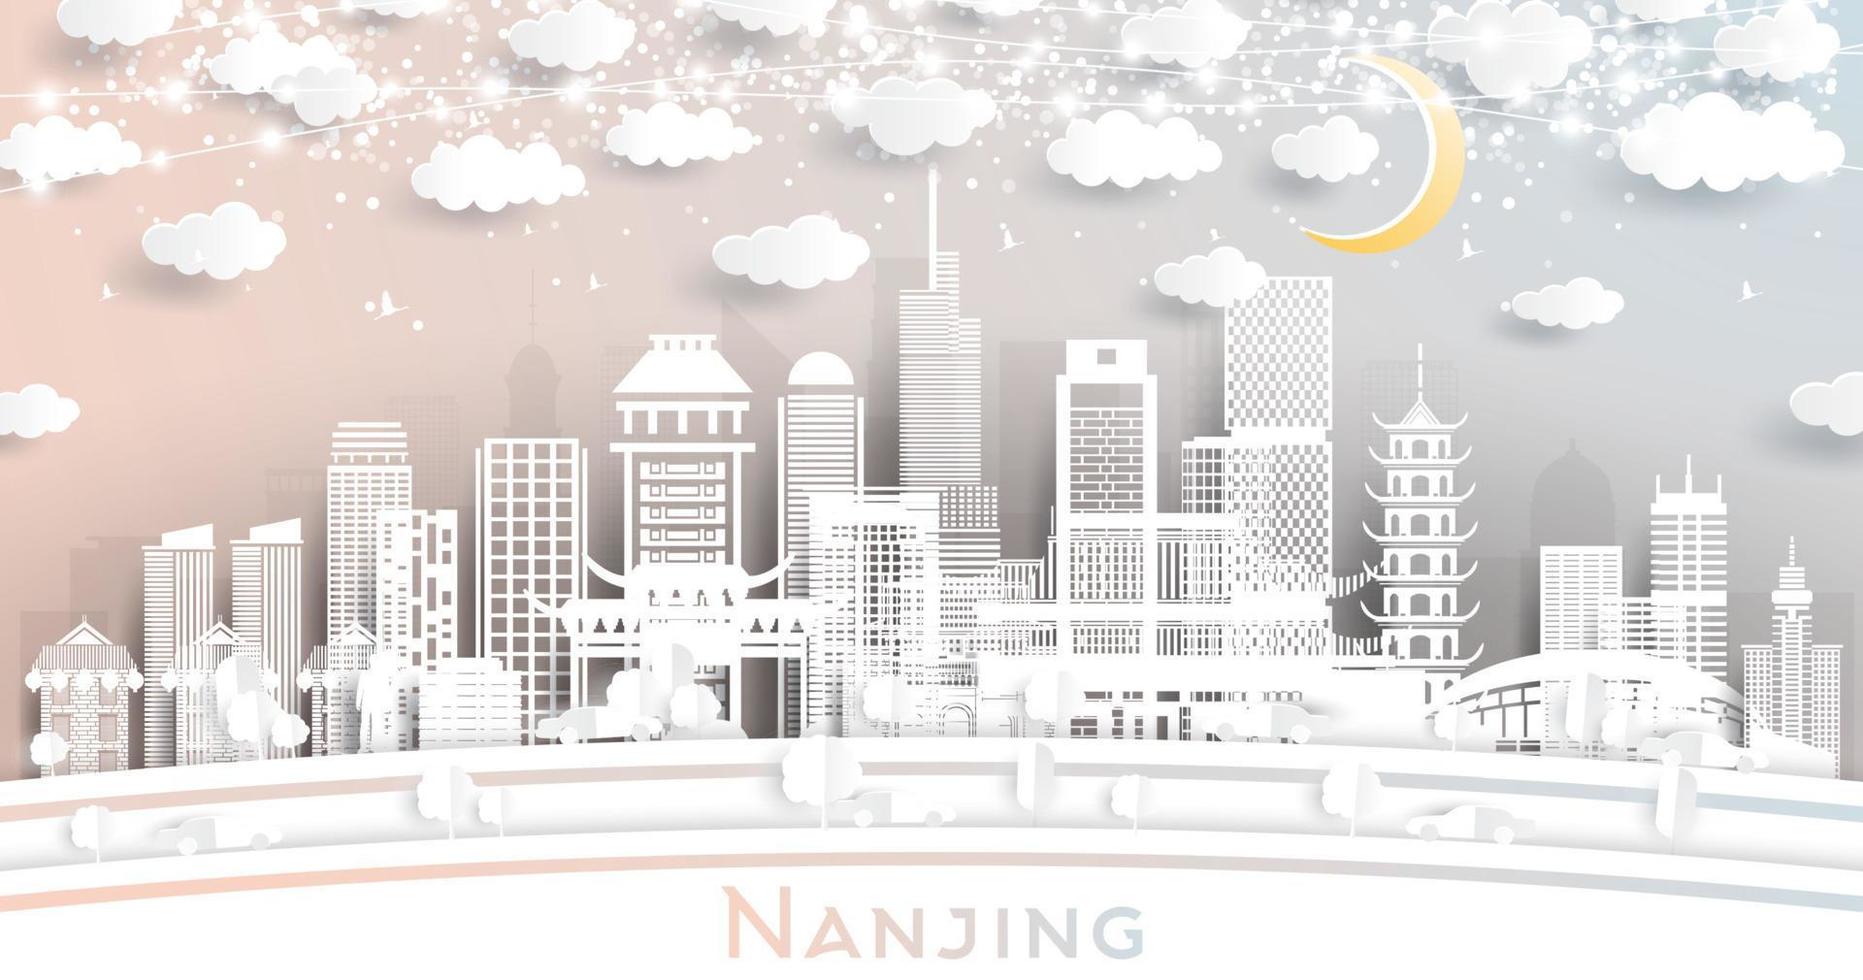 Nanjing China City Skyline in Paper Cut Style with White Buildings, Moon and Neon Garland. vector